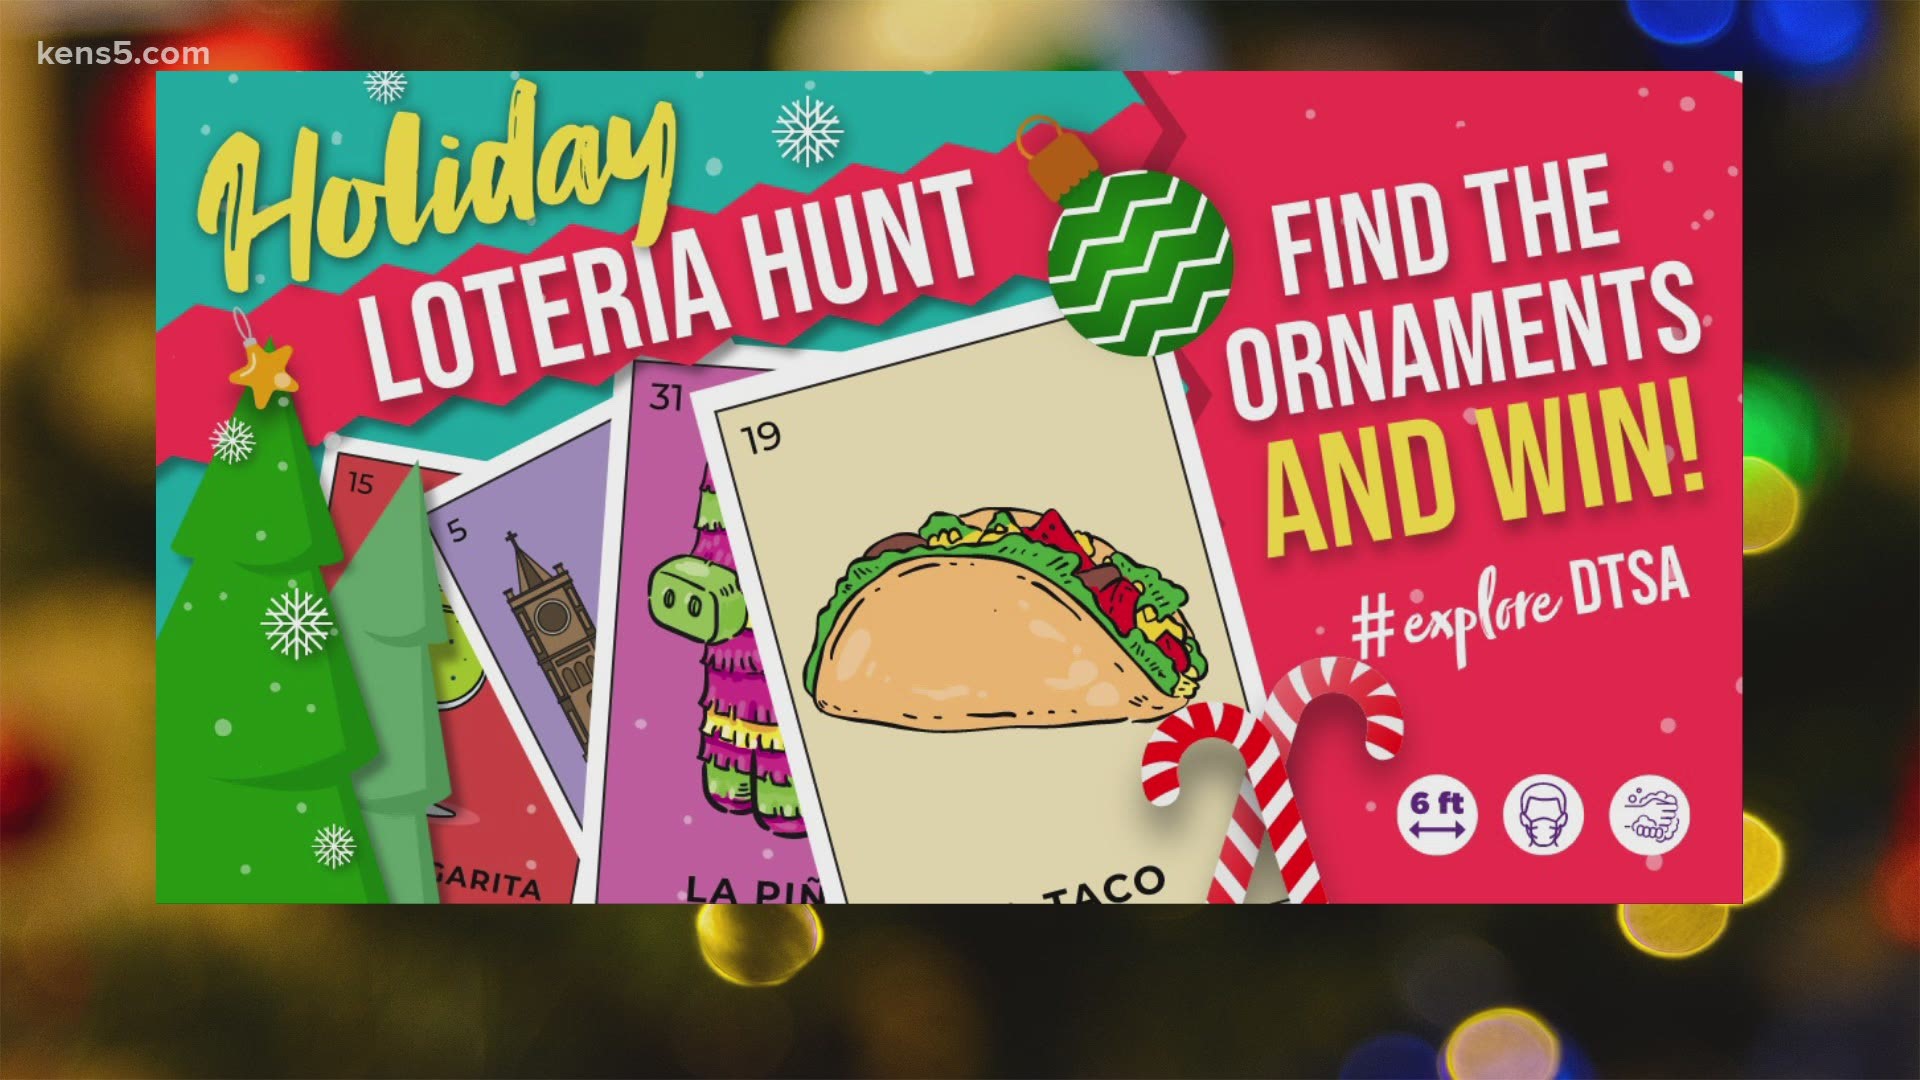 Digital Journalist Megan Ball shares more on the Holiday Lotería Scavenger Hunt-- a fun, safe way to get outside and win some holiday prizes.